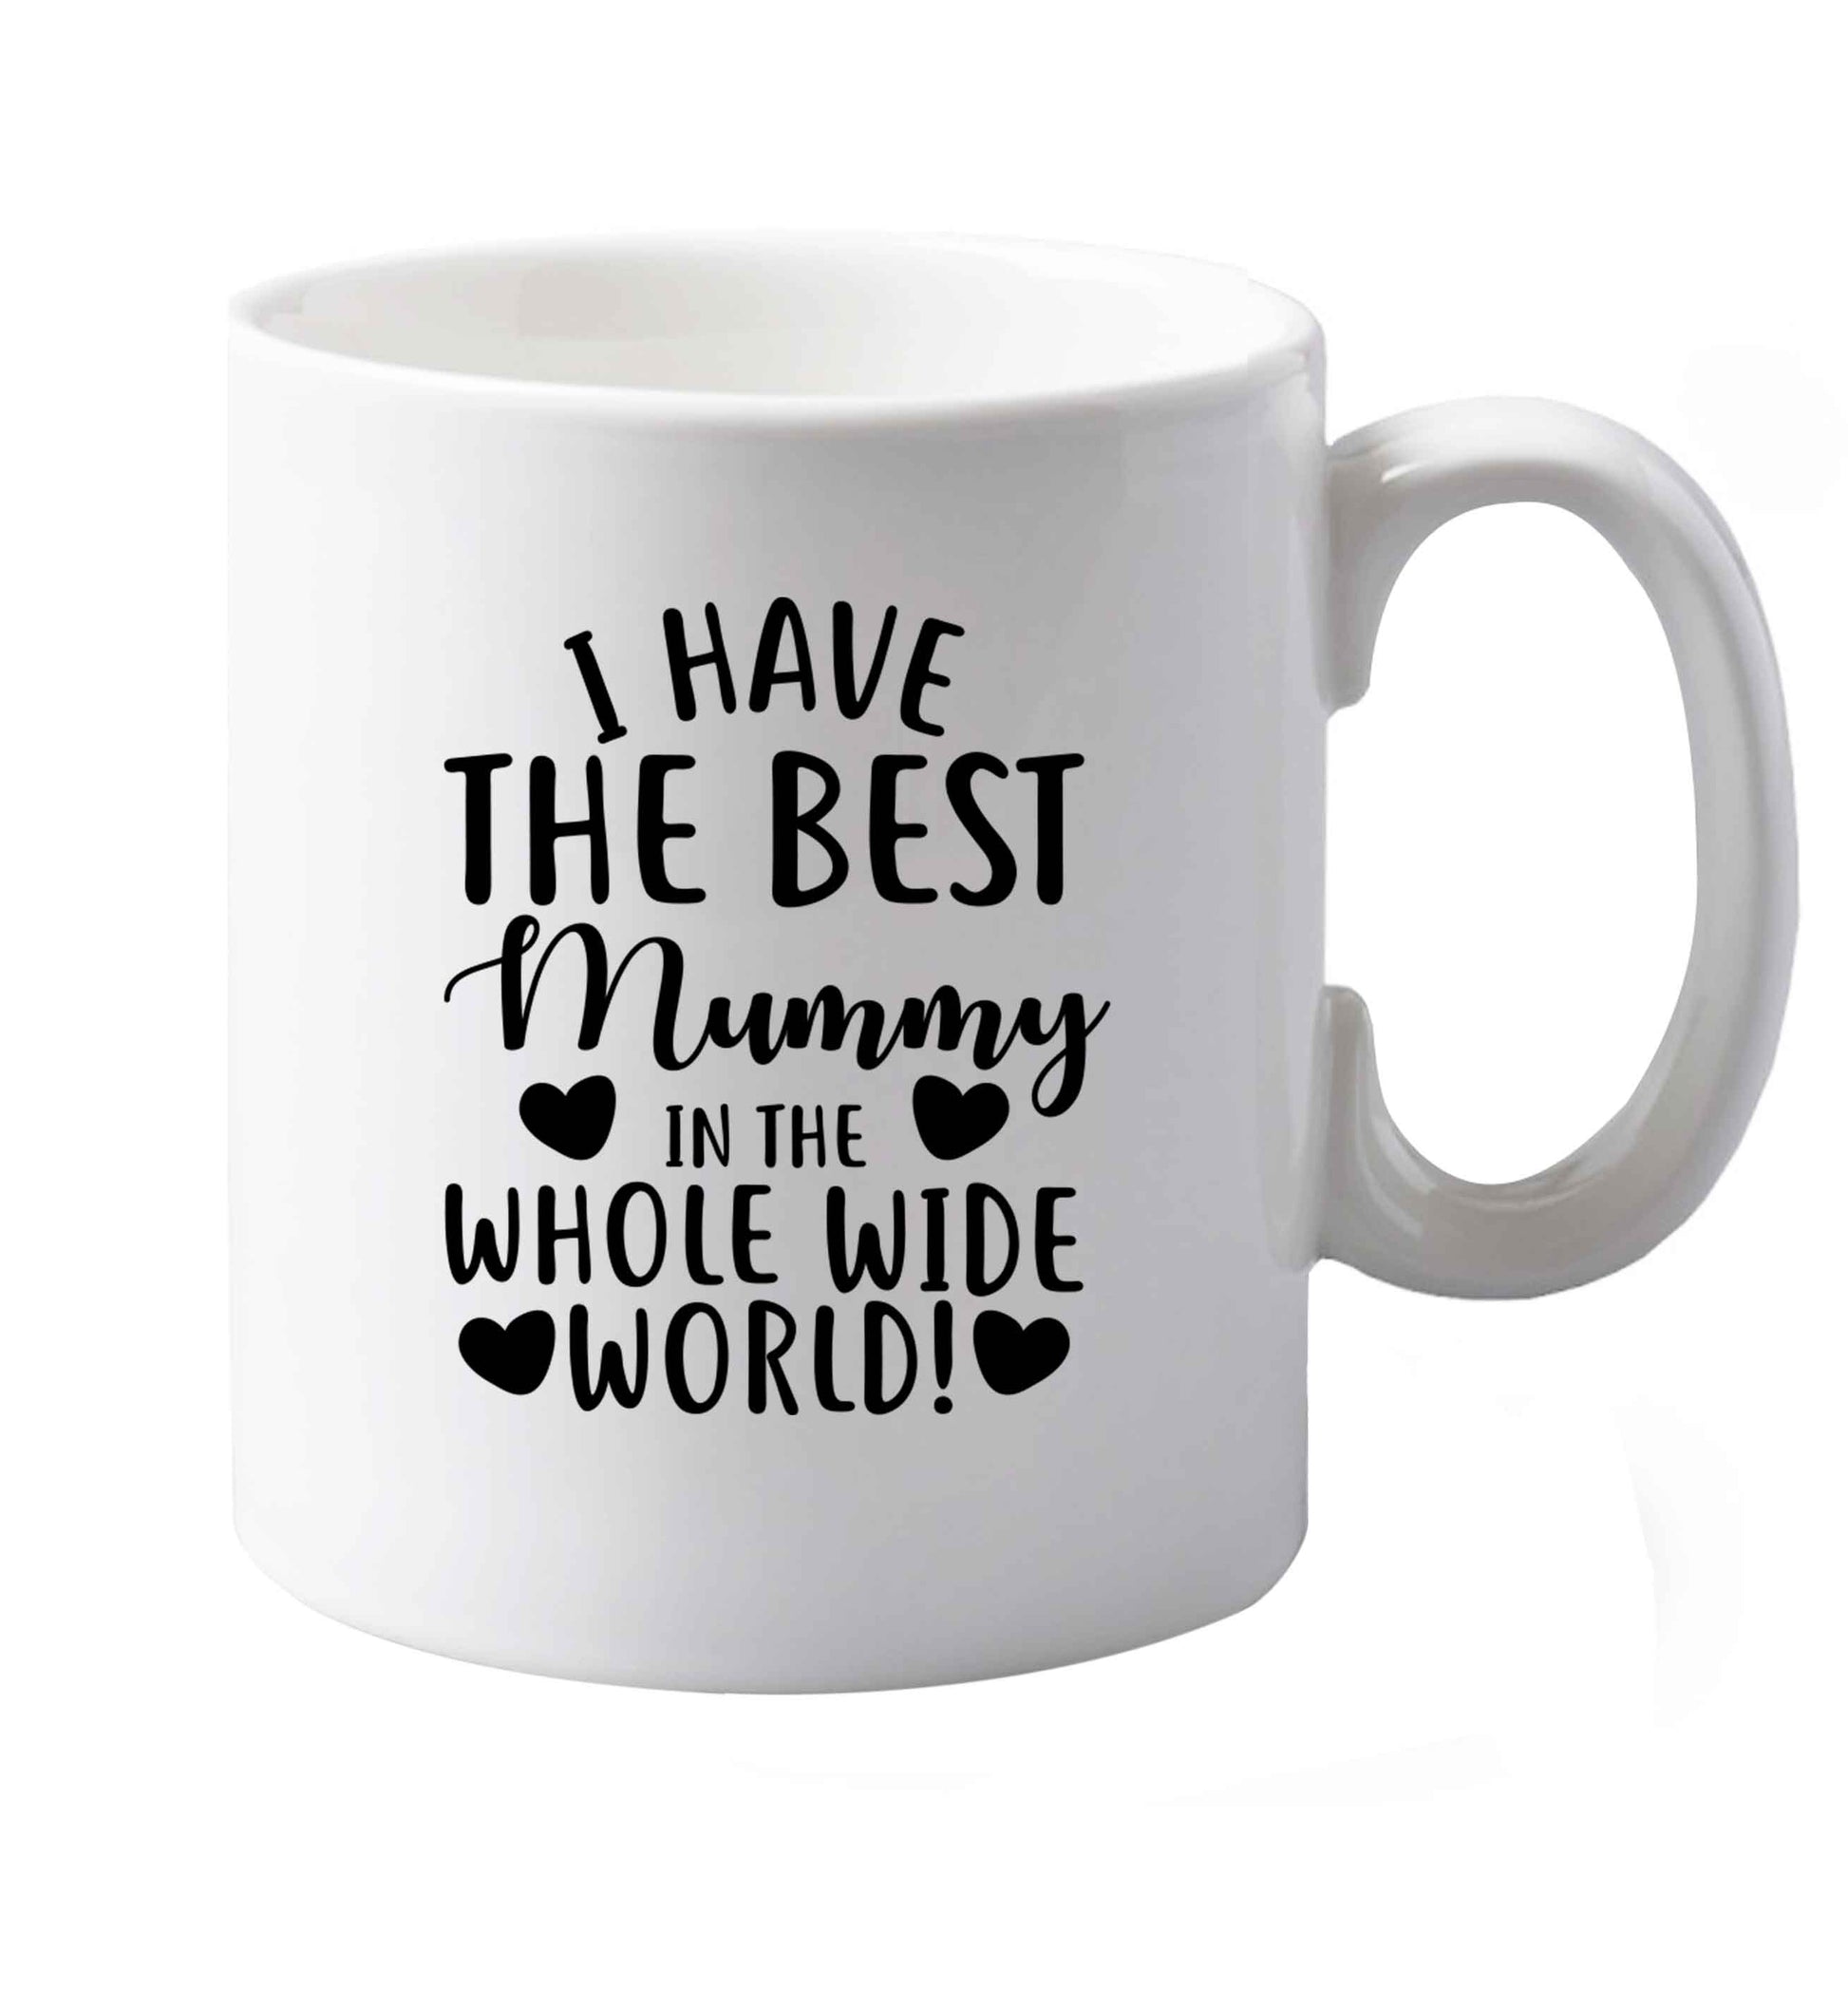 10 oz I have the best mummy in the whole wide world ceramic mug both sides